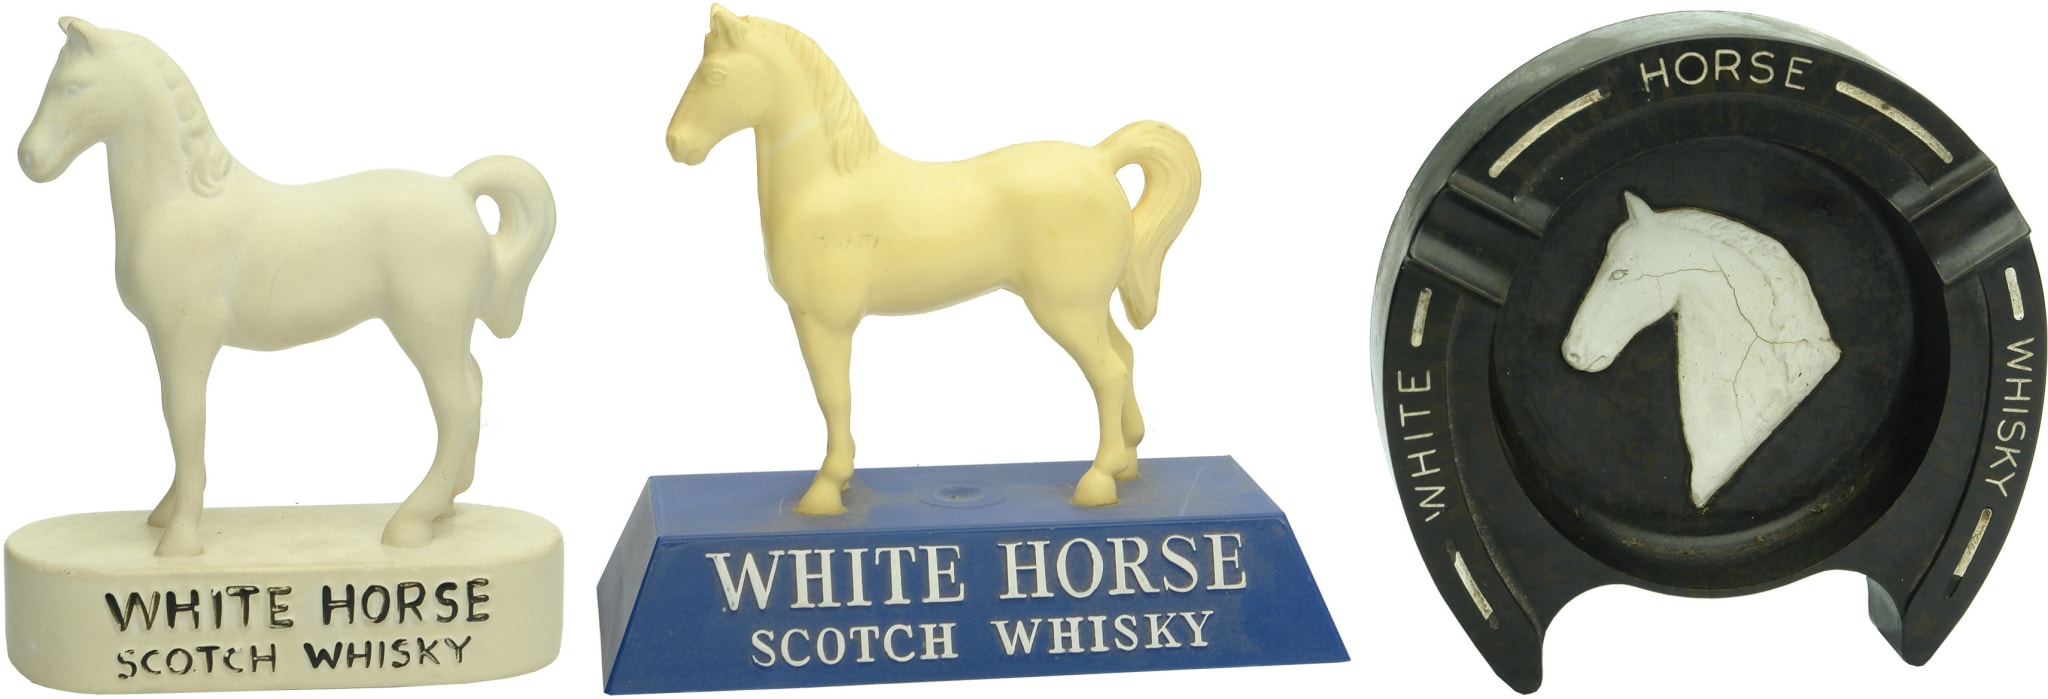 White Horse Scotch Whisky Advertising Items